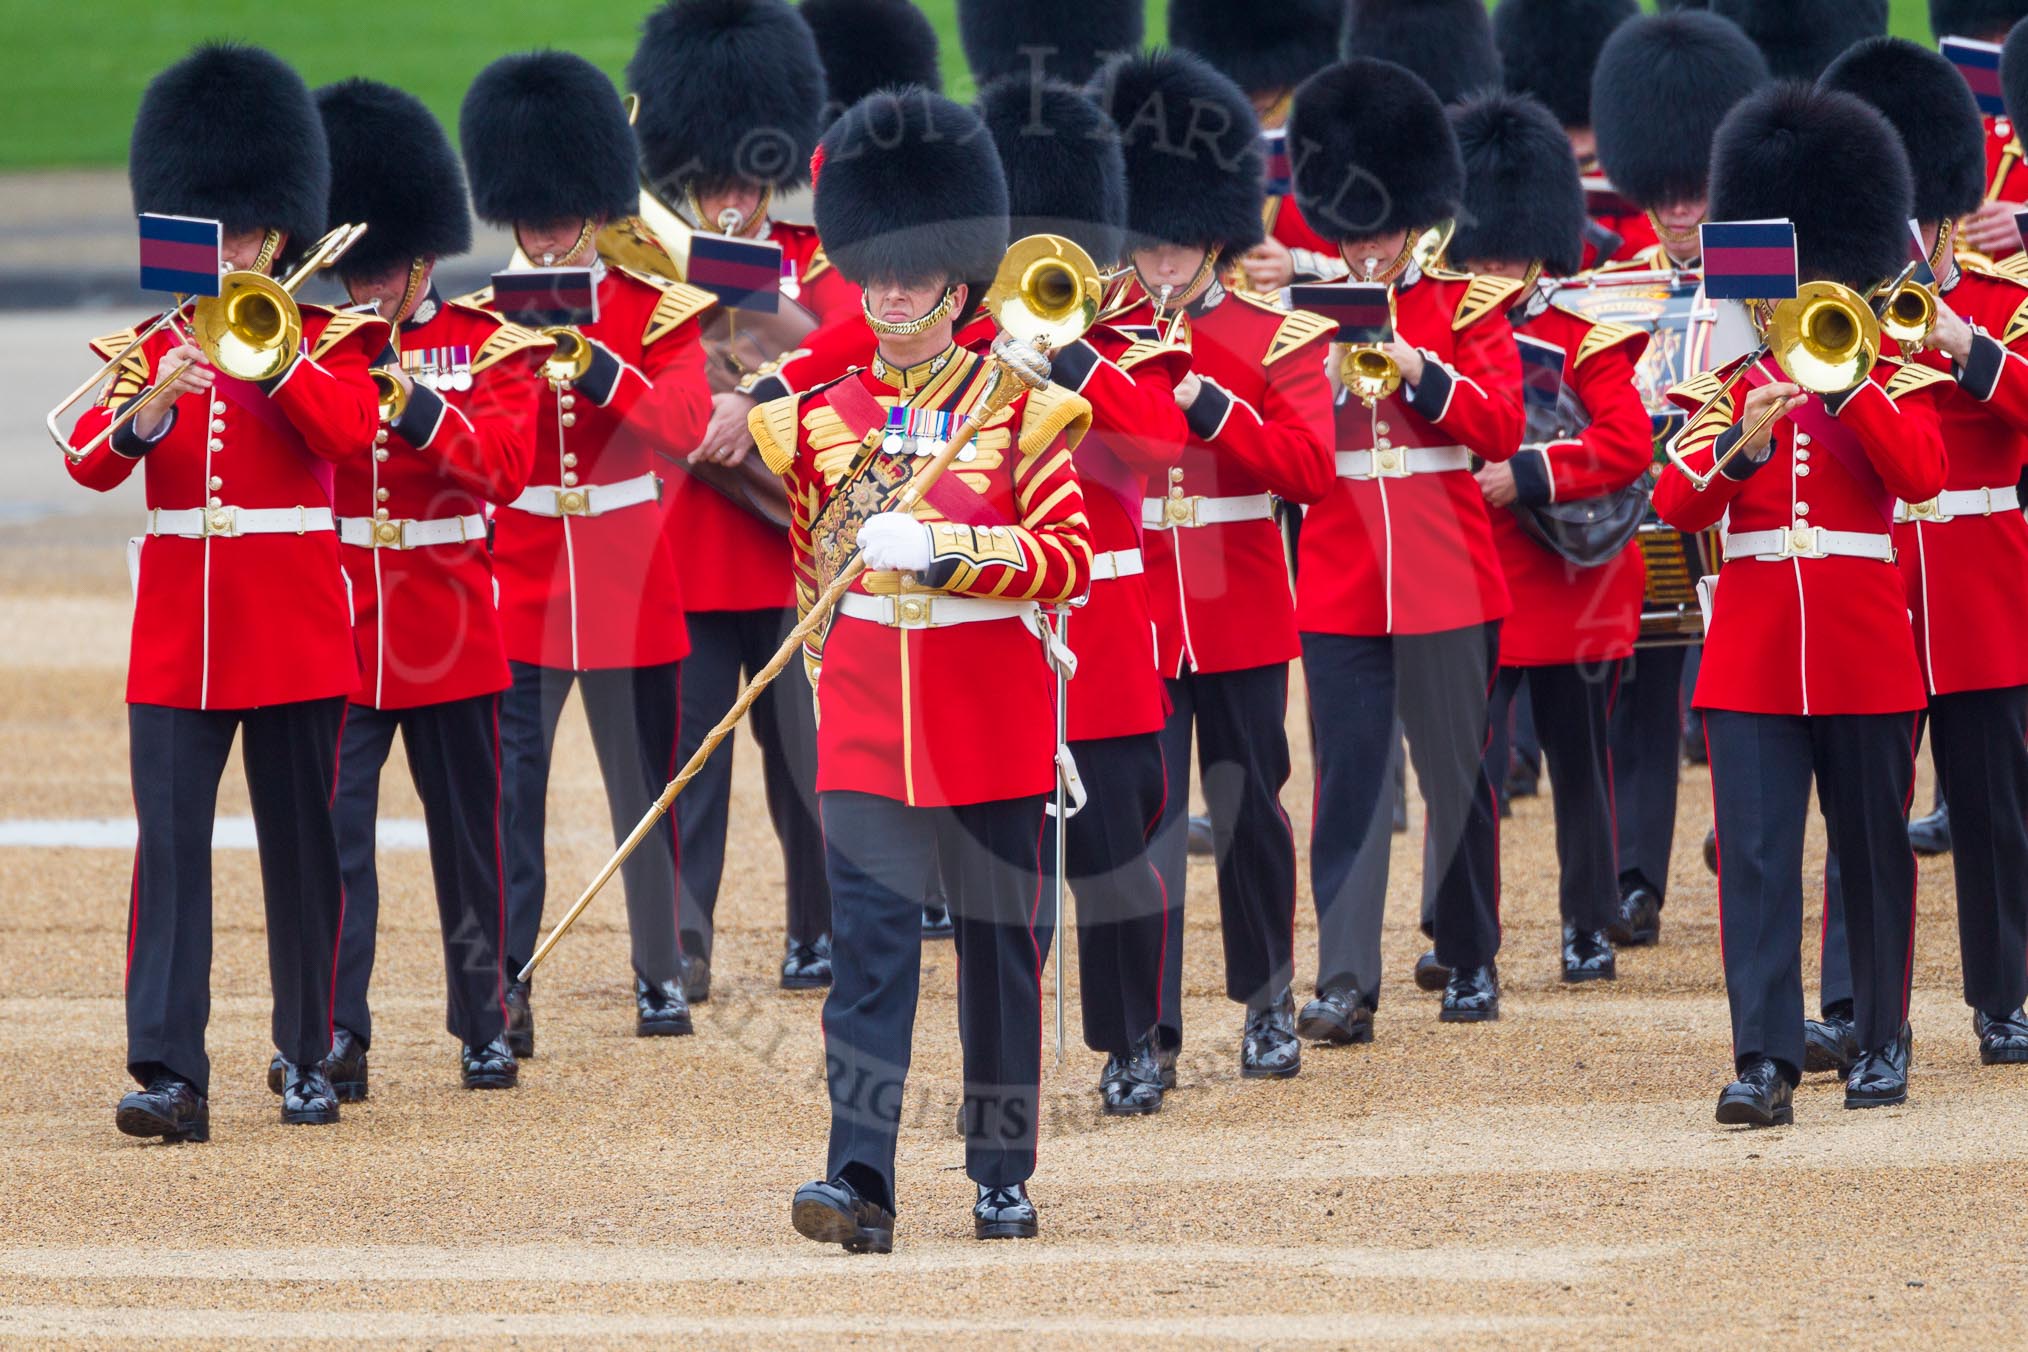 The Colonel's Review 2016.
Horse Guards Parade, Westminster,
London,

United Kingdom,
on 04 June 2016 at 10:18, image #46